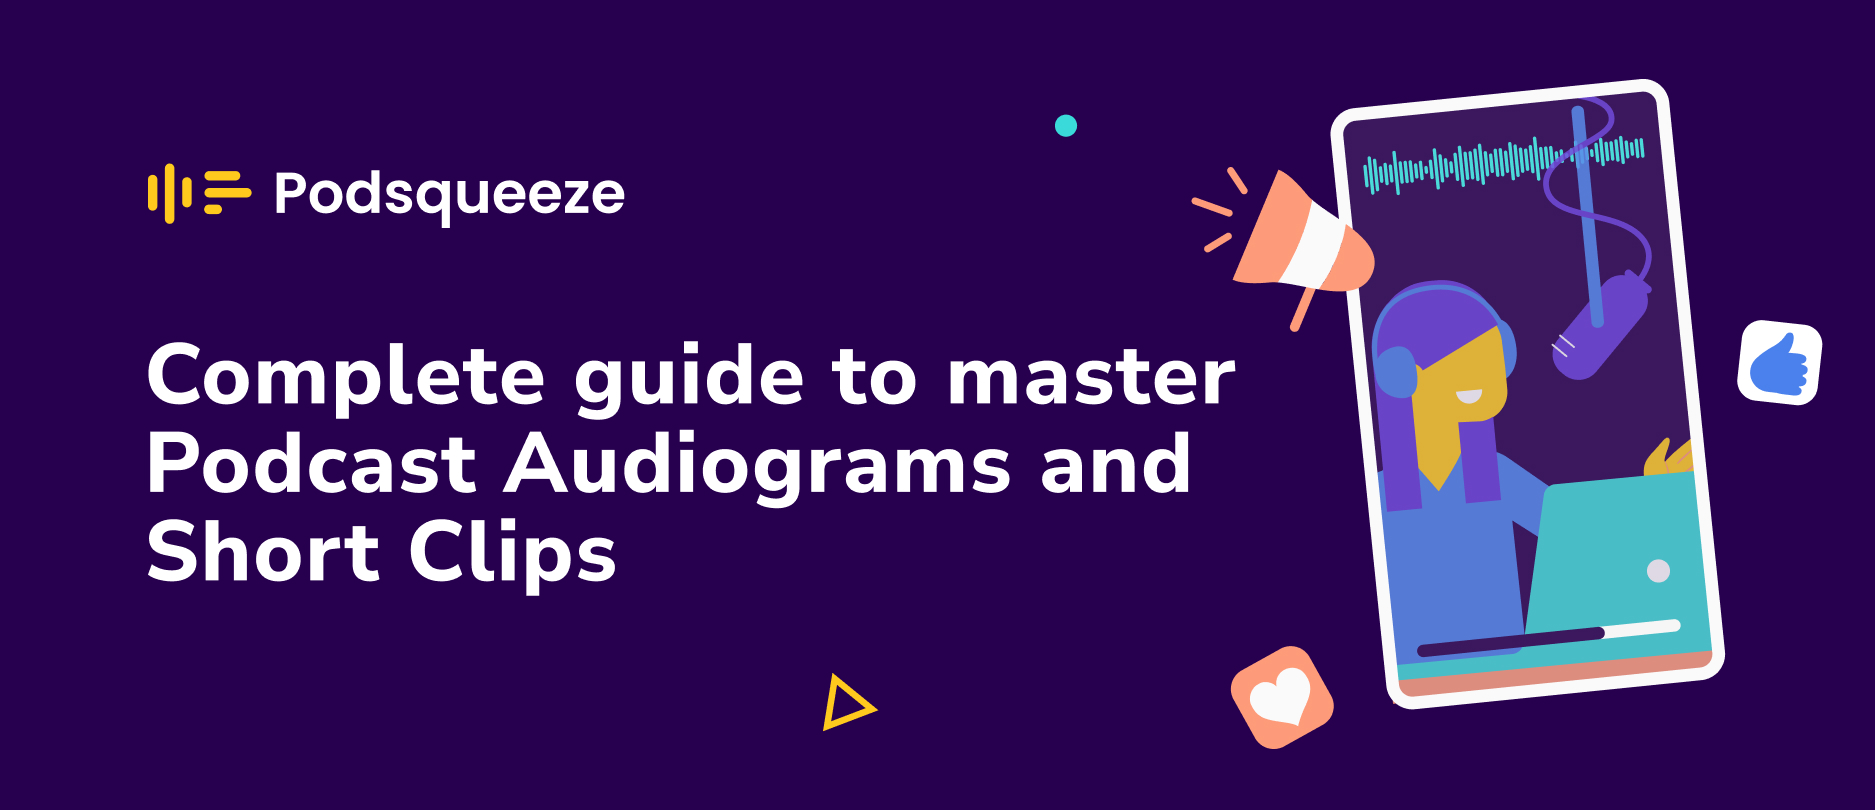 podcast audiograms and clips article cover